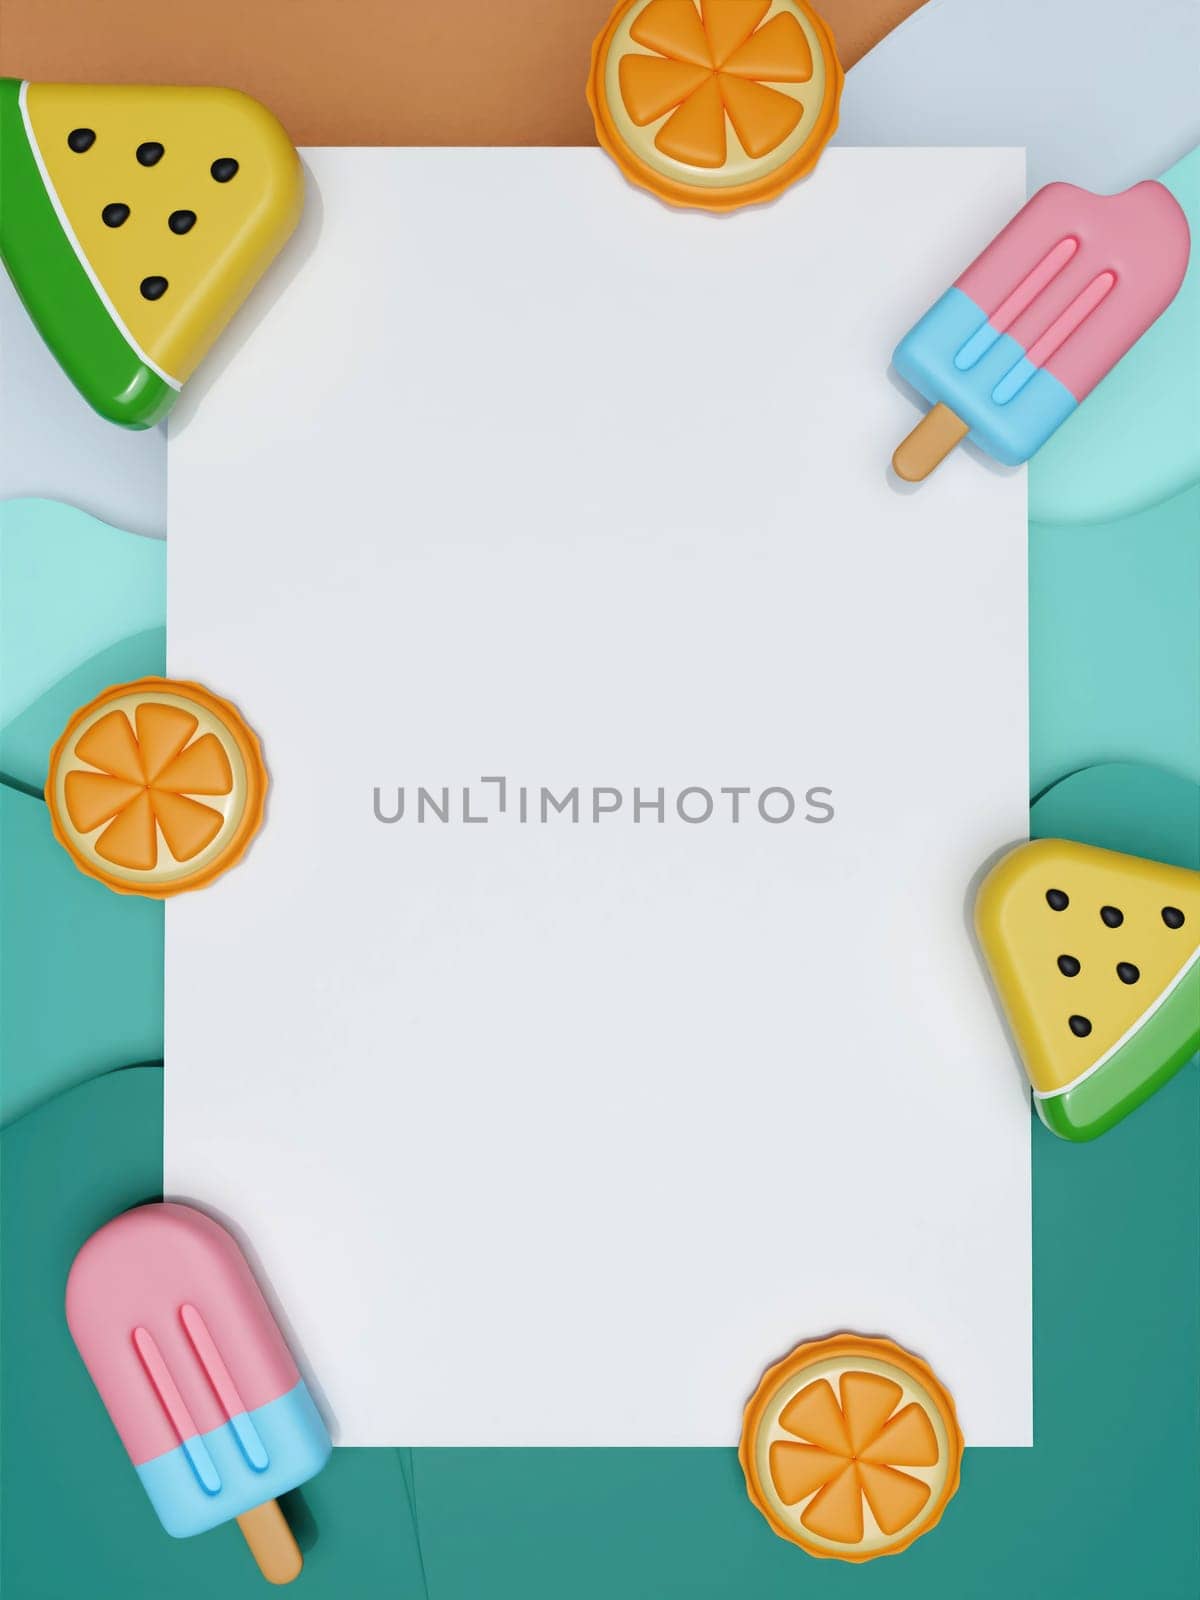 Summer vacation. white frame Decorated with popsicle watermelon and orange. Creative travel concept idea with copy space. illustration banner 3d rendering illustration by meepiangraphic